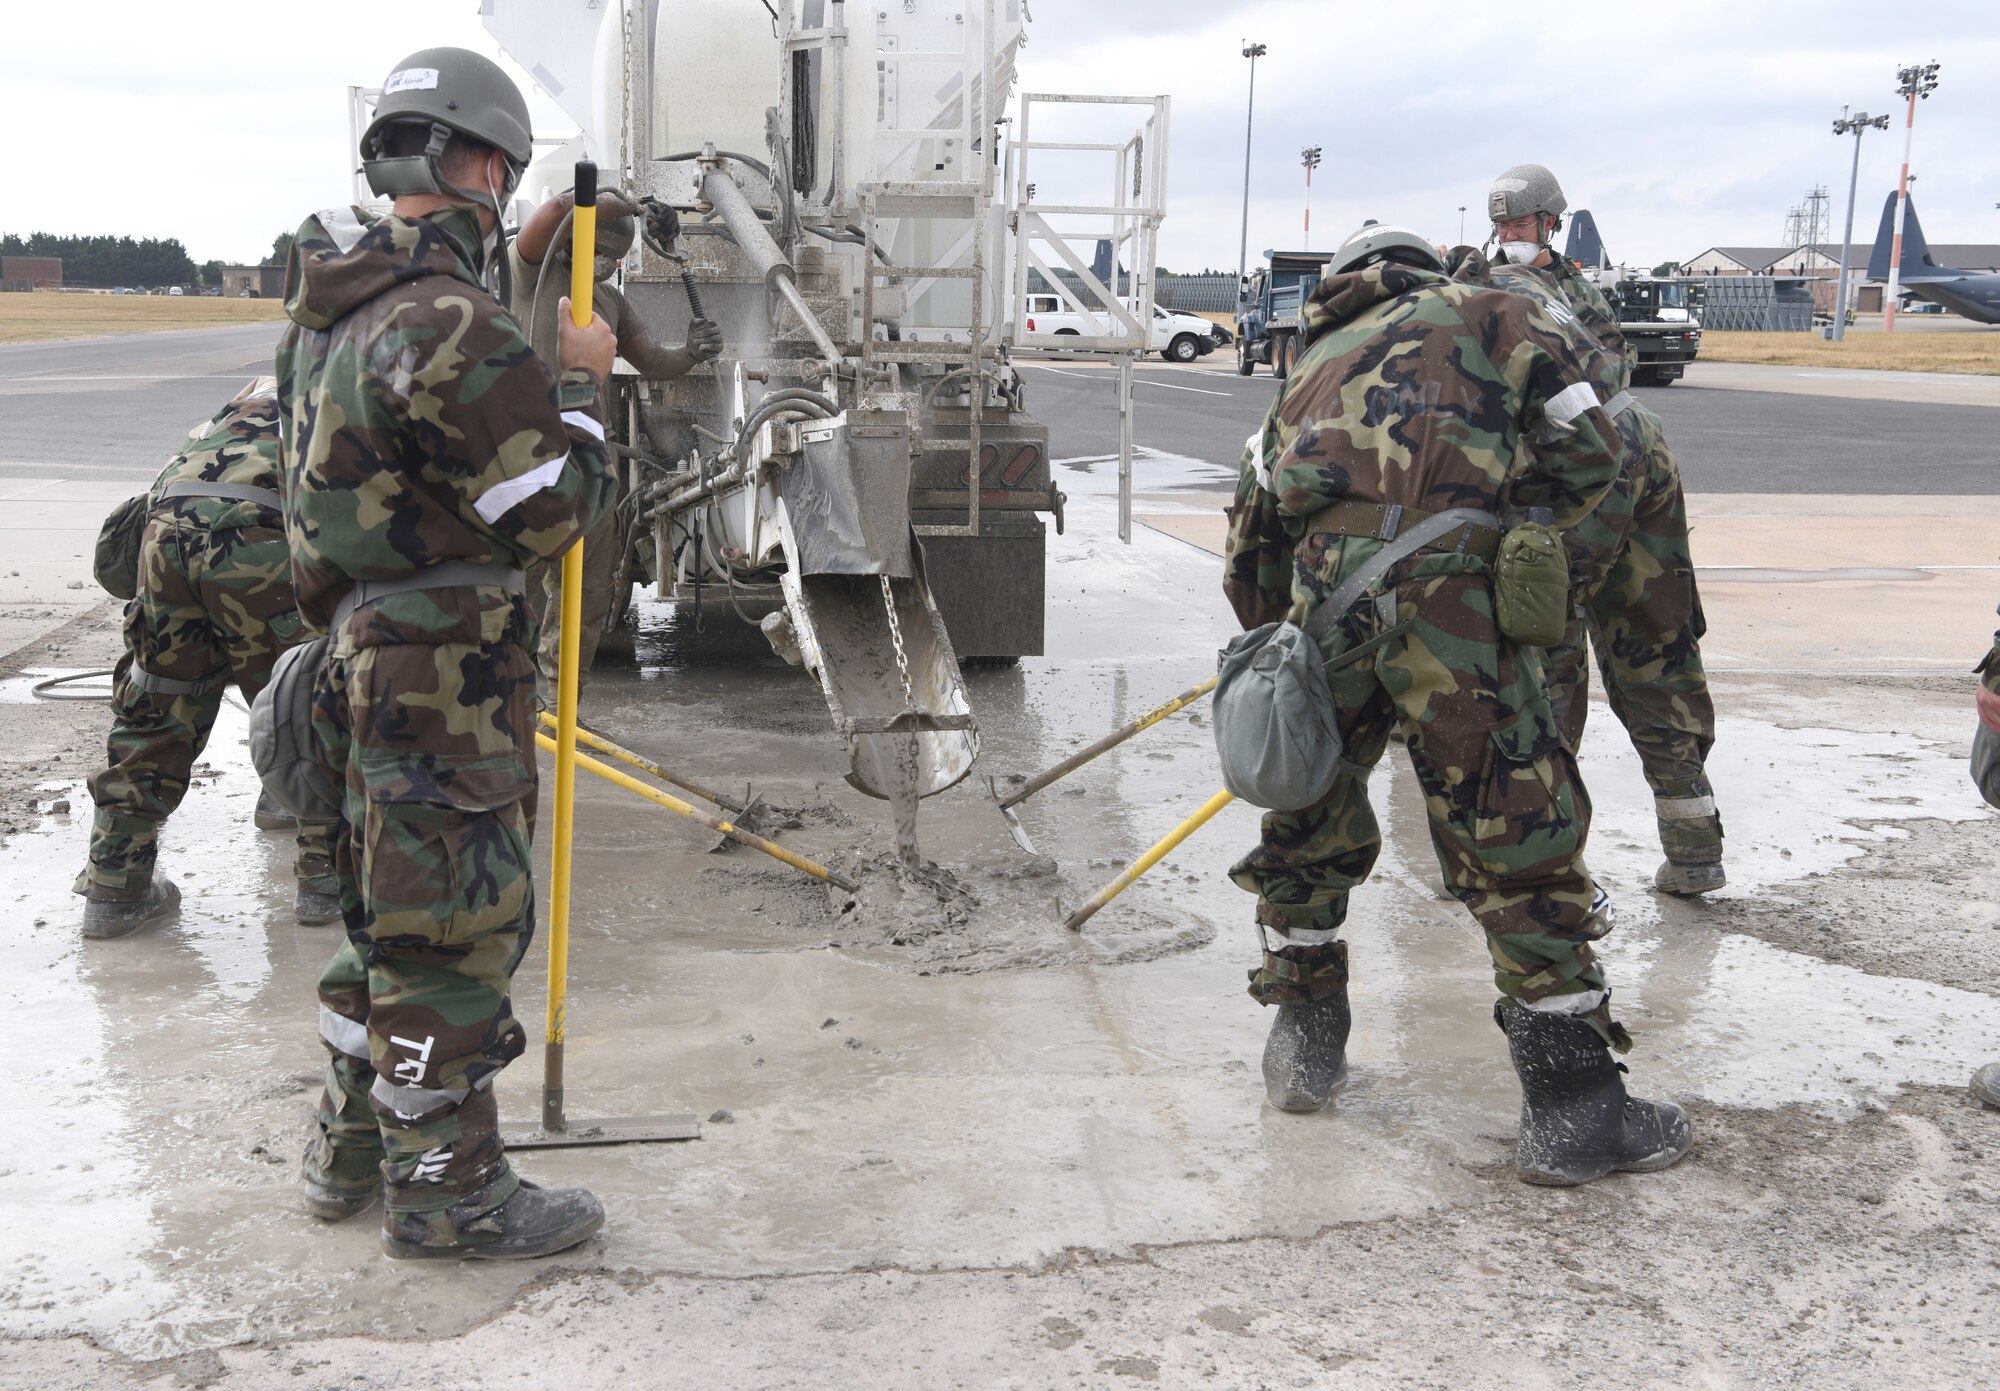 U.S. Air Force Airmen from the 100th Civil Engineer Squadron smooth out fast-drying concrete during a simulated damaged runway repair as part of a chemical, biological, radiological, nuclear and explosives exercise at Royal Air Force Mildenhall, England, Aug. 17, 2022. The 100th CES Airmen used a variety of equipment including excavators and loaders to practice removing damaged concrete and base course on a simulated runway. They practiced repair, break up and removal of concrete, before mixing and pouring new, quick-drying concrete and levelling it. (U.S. Air Force photo by Karen Abeyasekere)